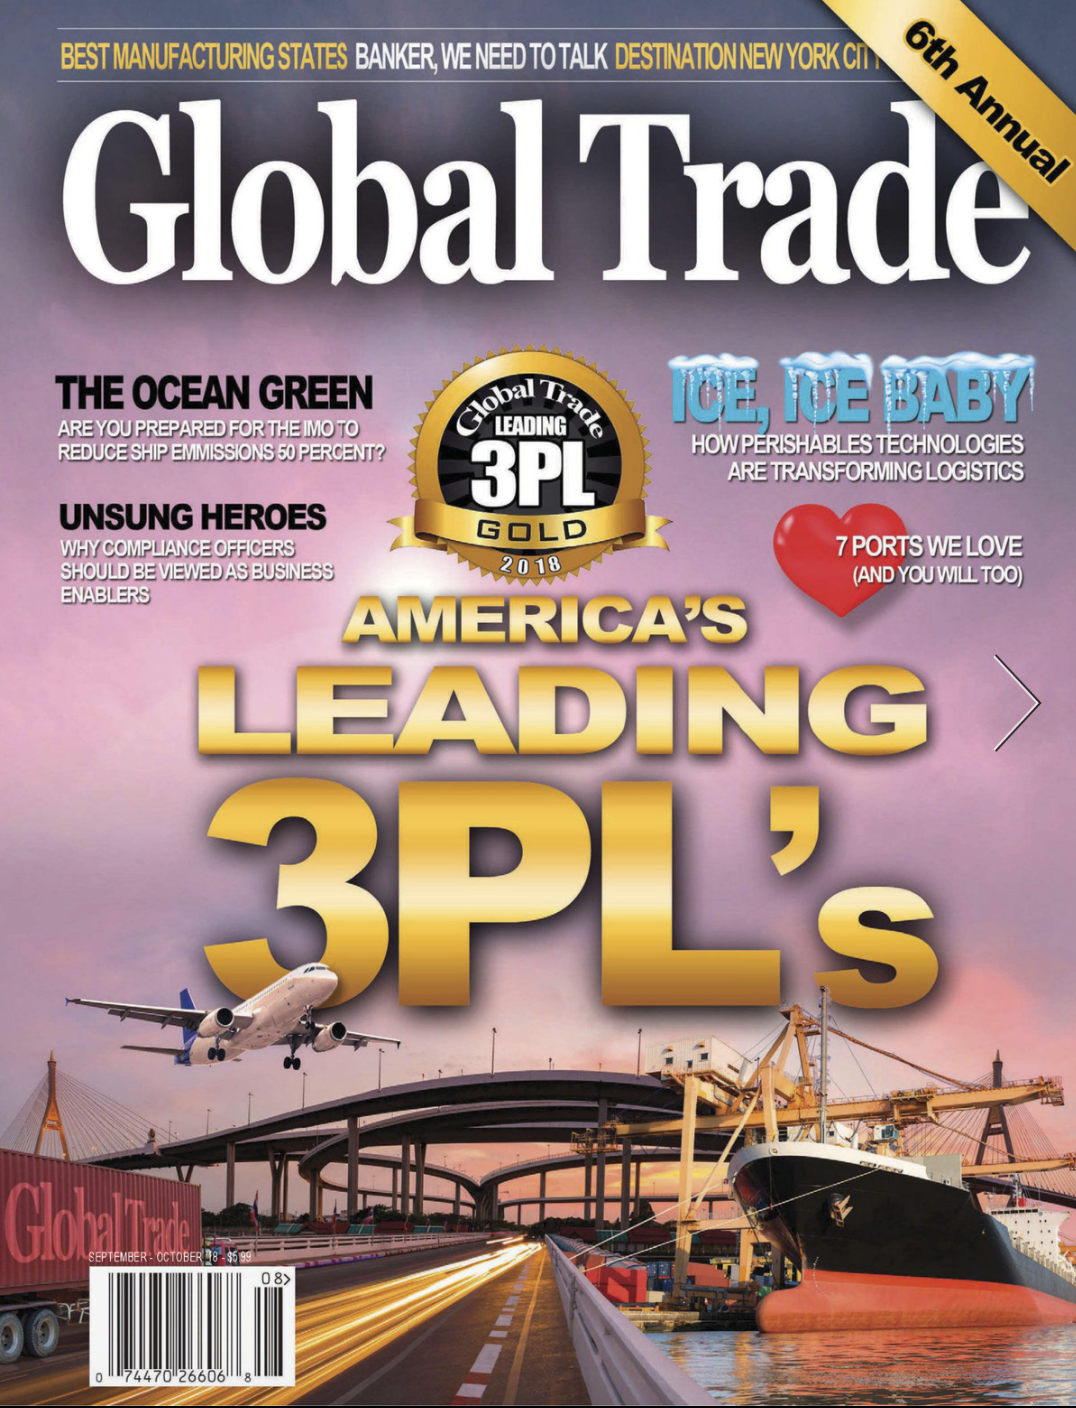 Sunland Recognized as one of America’s 50 Leading 3PL by Global Trade